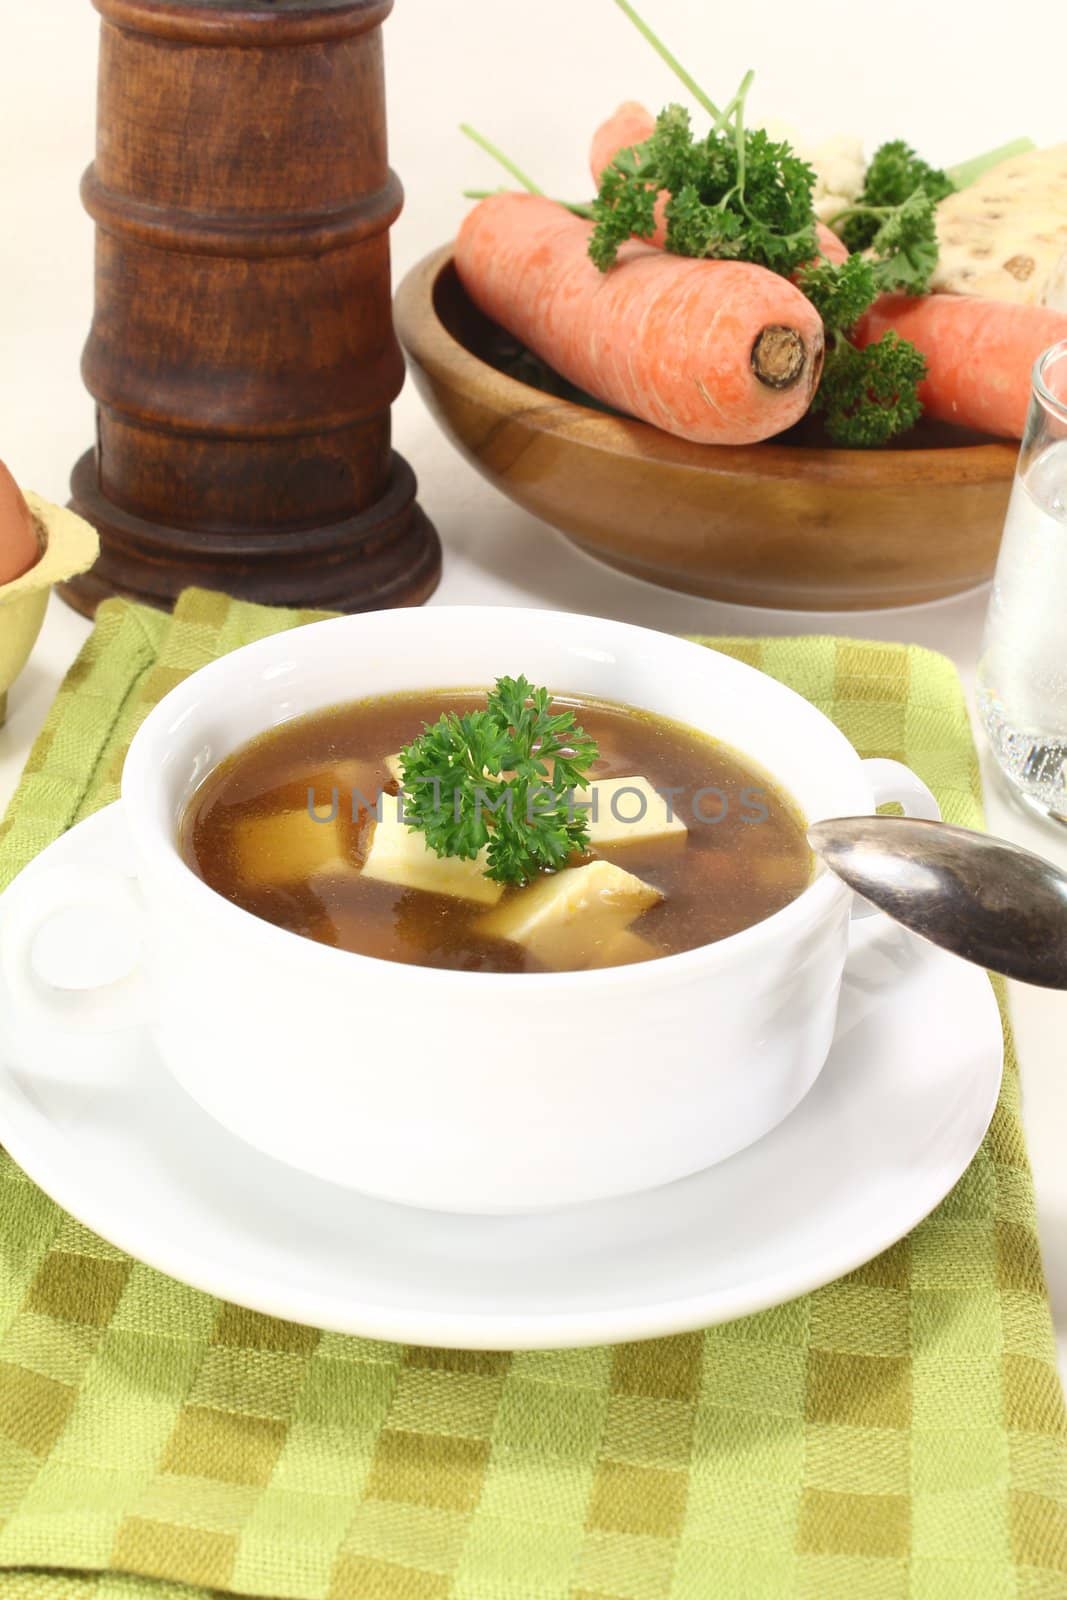 Beef consomme with parsley by discovery